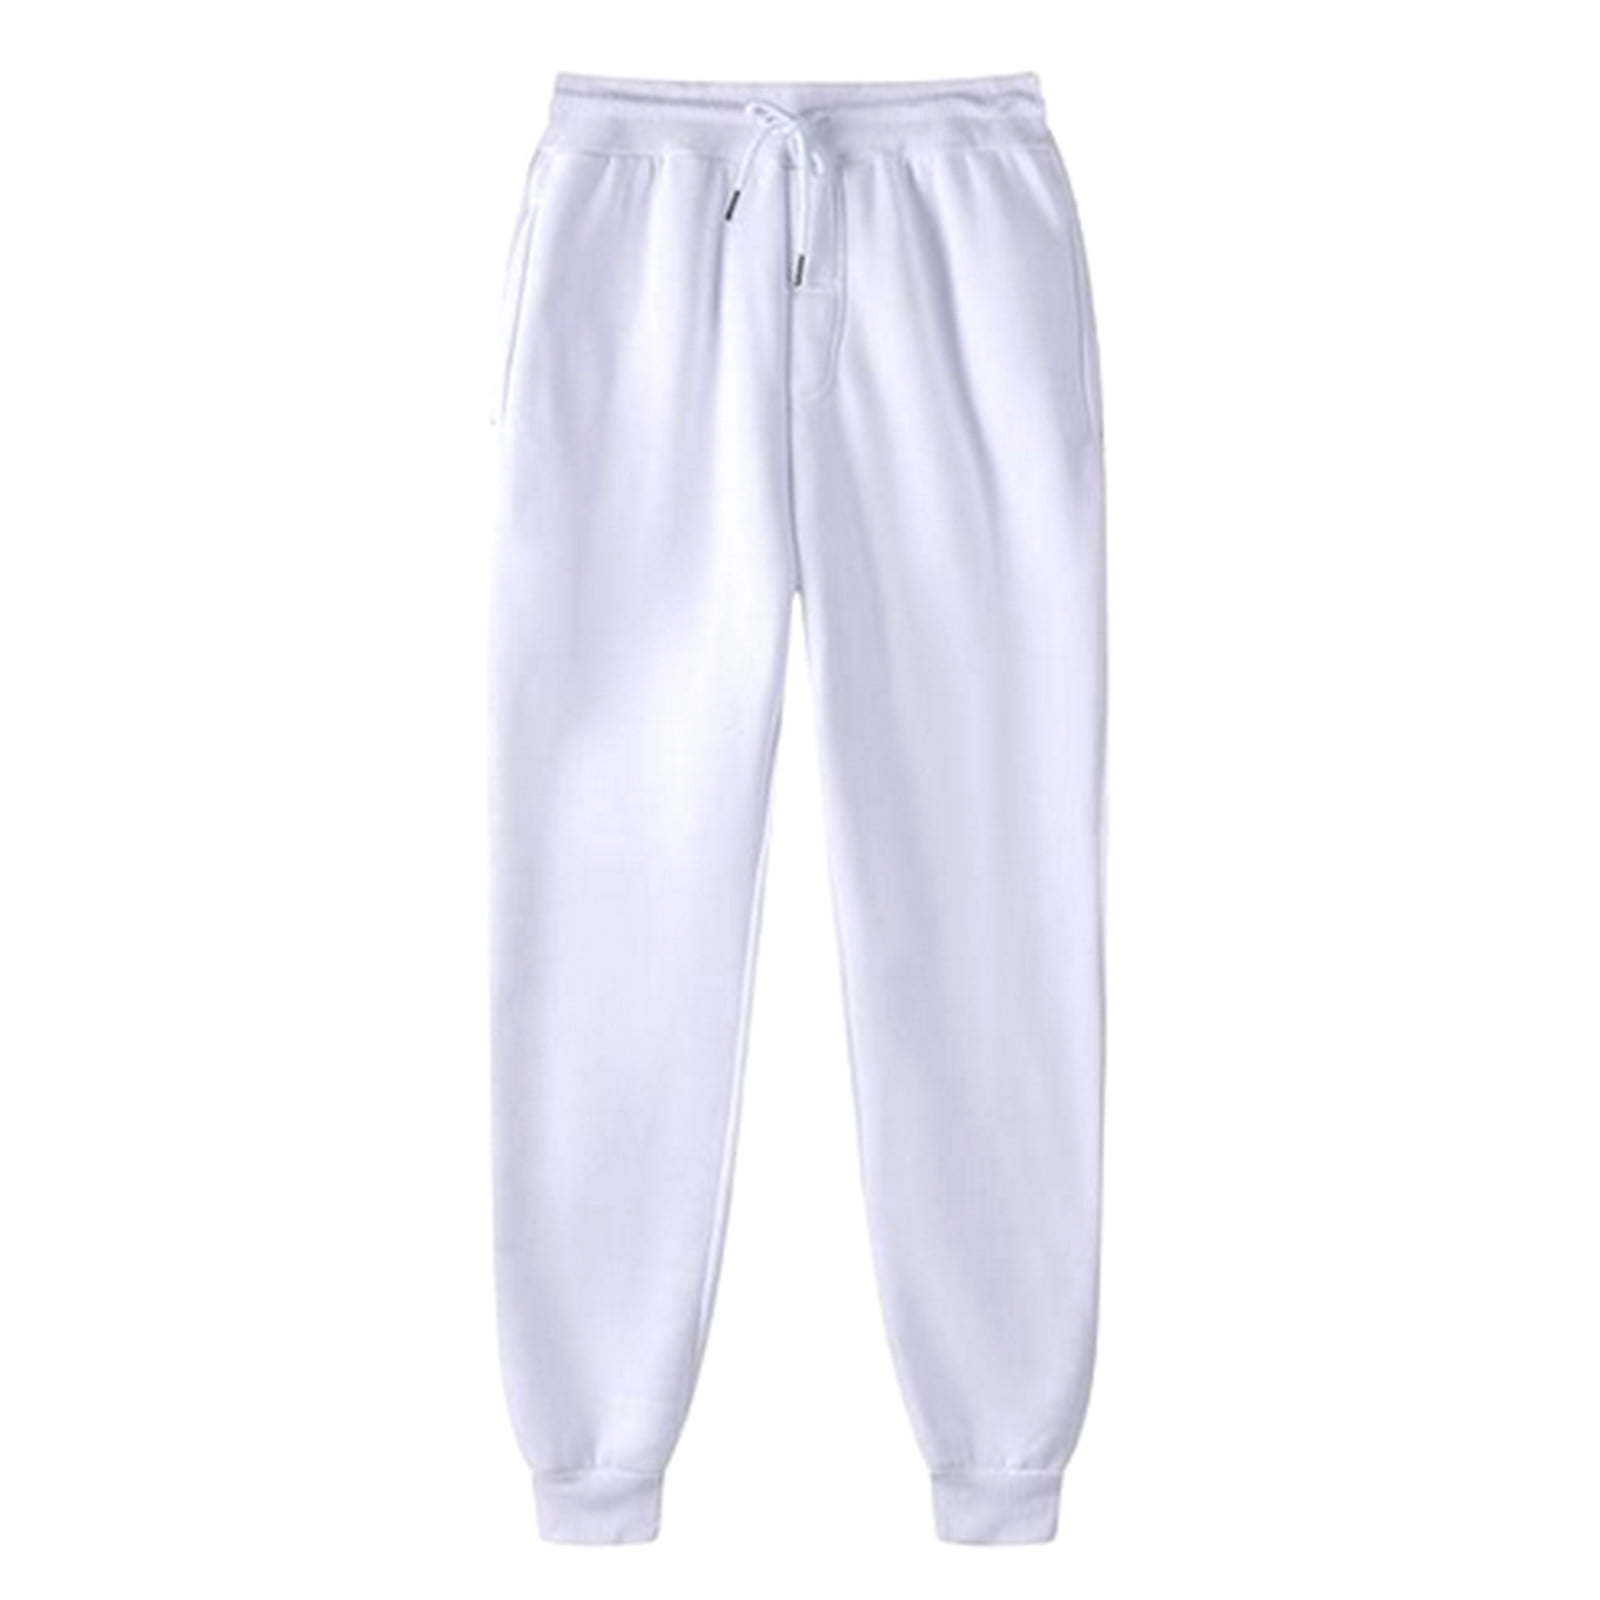 OKBOP Womens Pants Dressy Casual,Men's Casual Trousers And Trousers ...